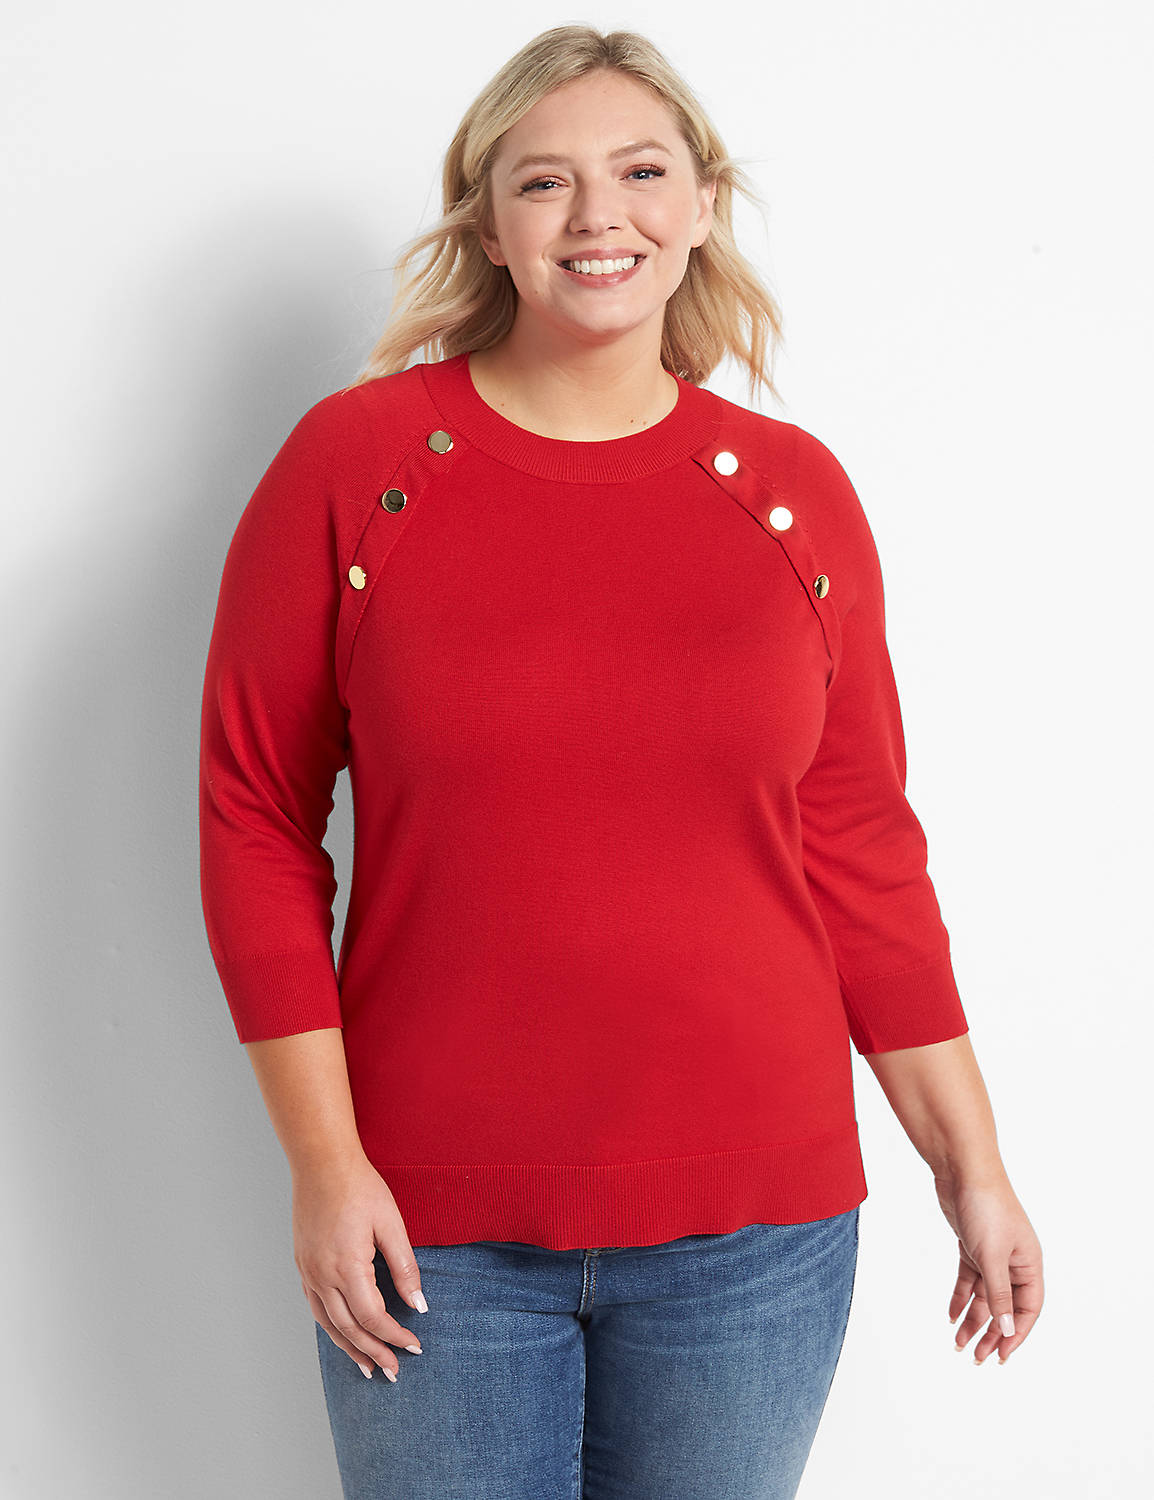 Raglan-Sleeve Sweater With Button Detail Product Image 1